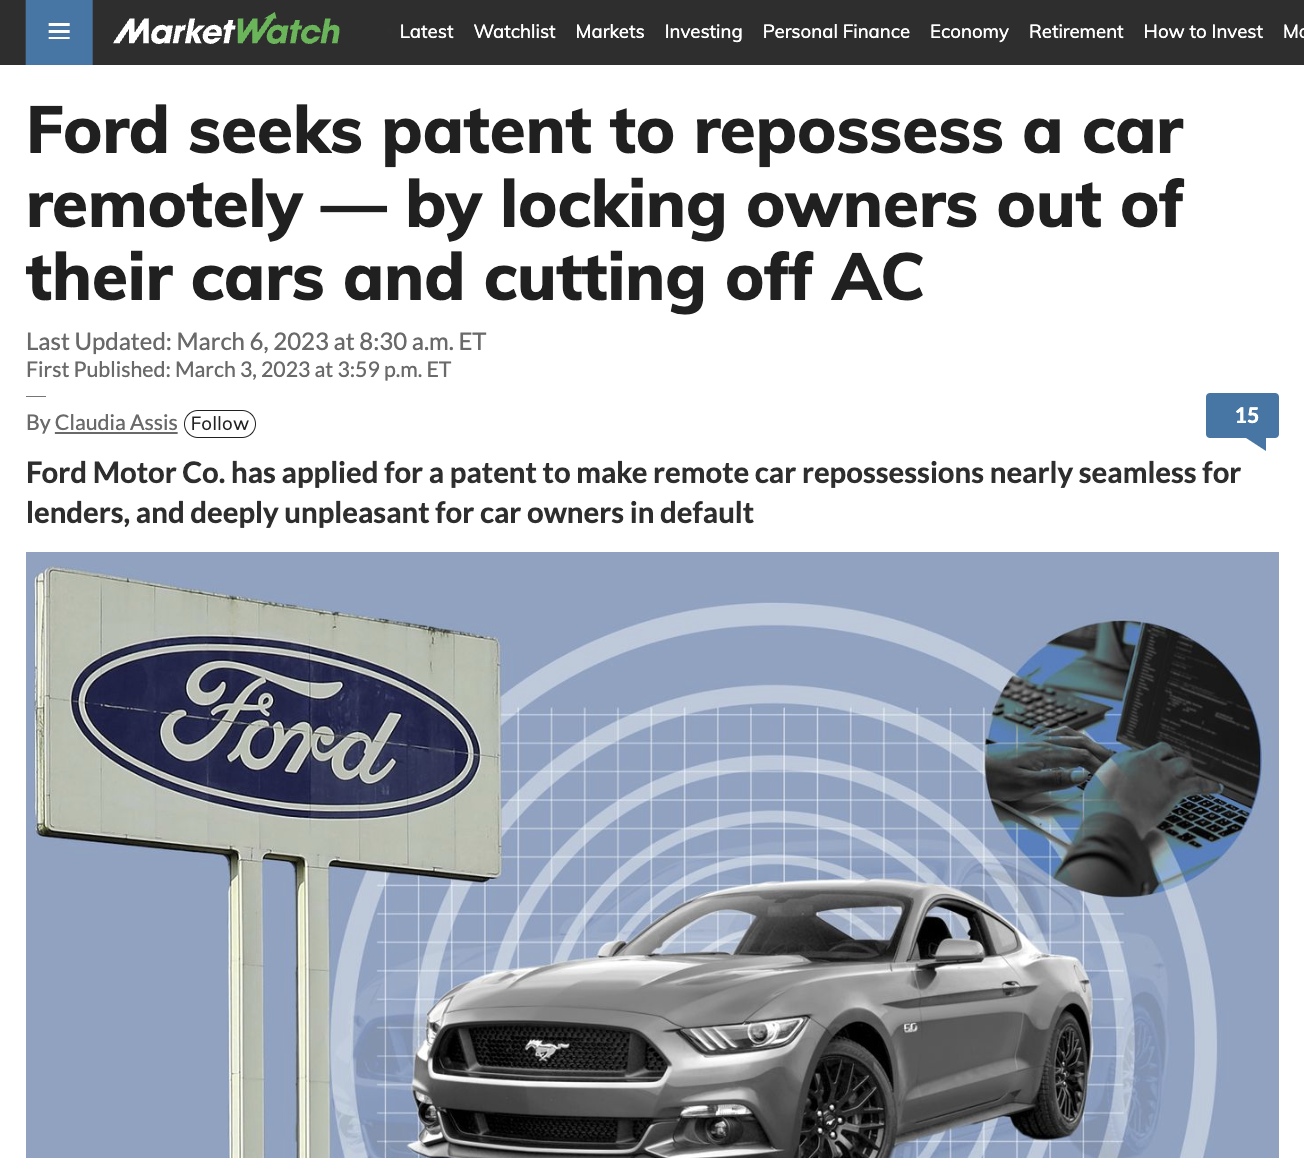 Ford seeks patent to repossess a car remotely — by locking owners out of their cars & cutting off AC & forcing car’s audio system to ’emit an incessant & unpleasant sound’